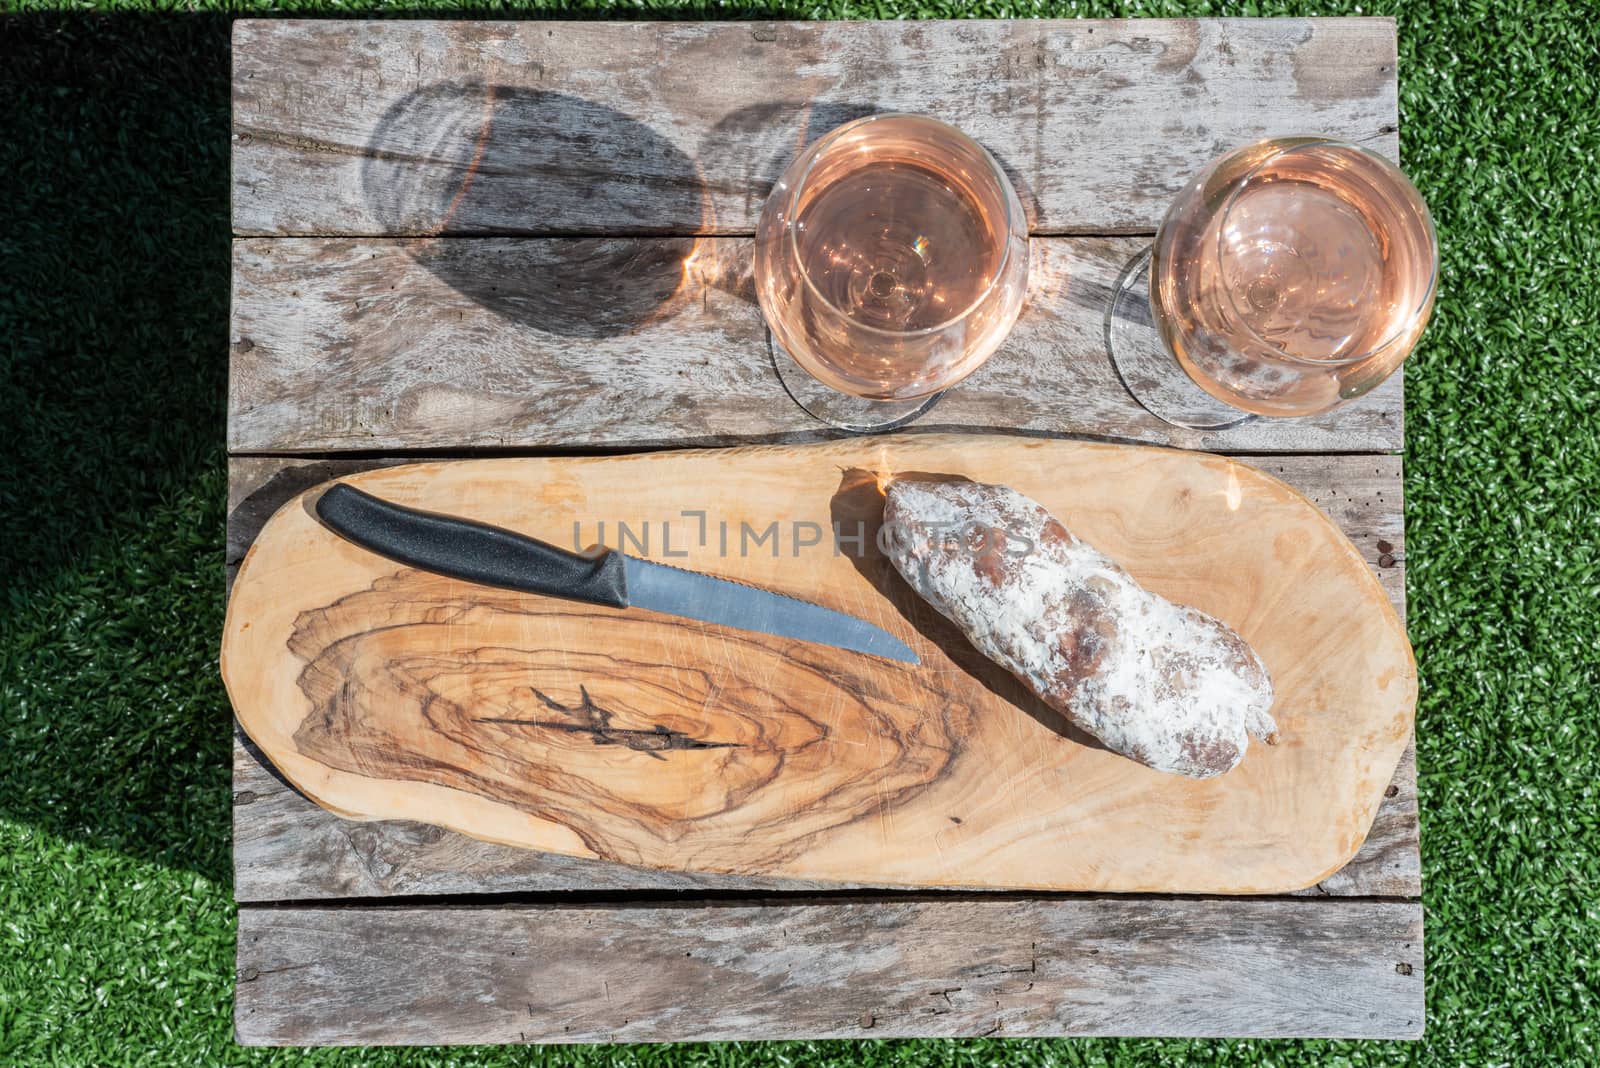 Two glasses of rose wine and a dried sausage with a knife on a wooden table by LP2Studio